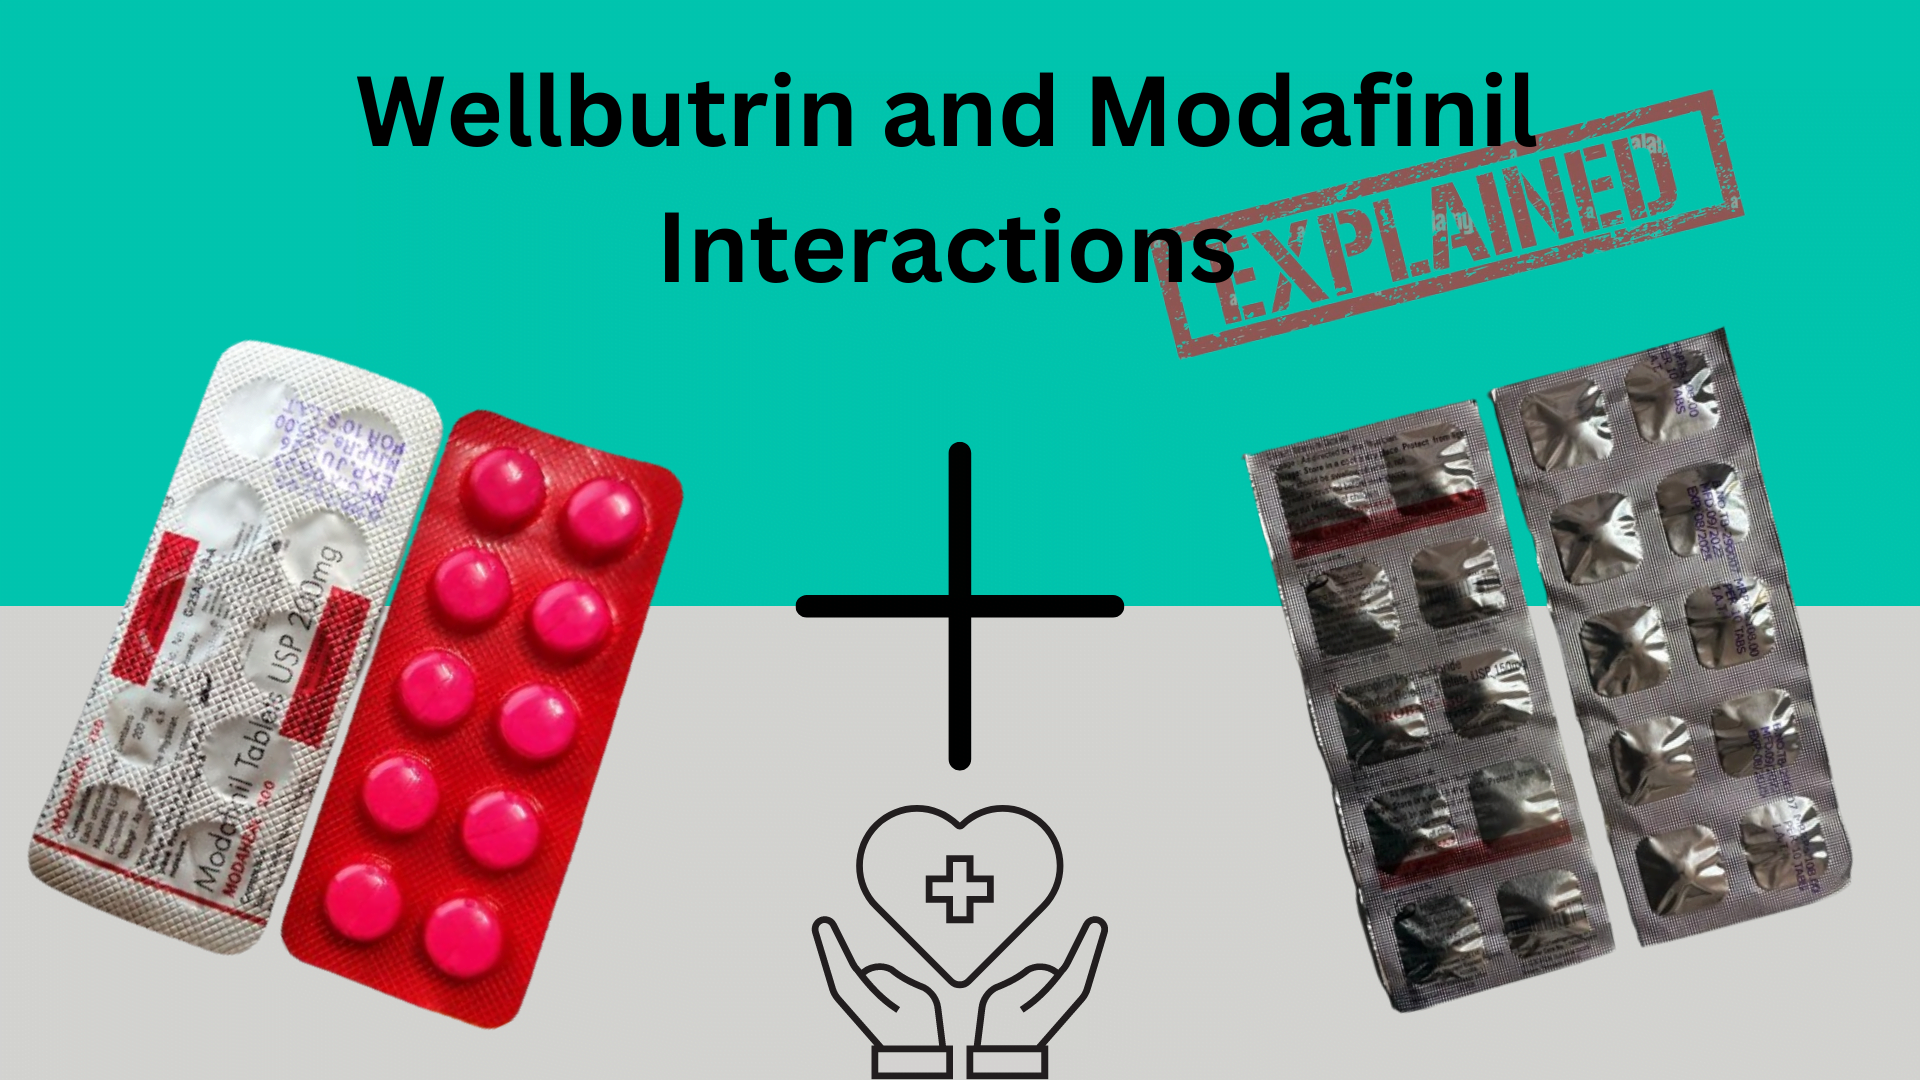 Illustration depicting the interaction between Wellbutrin and Modafinil, two medications known for their cognitive-enhancing effects.